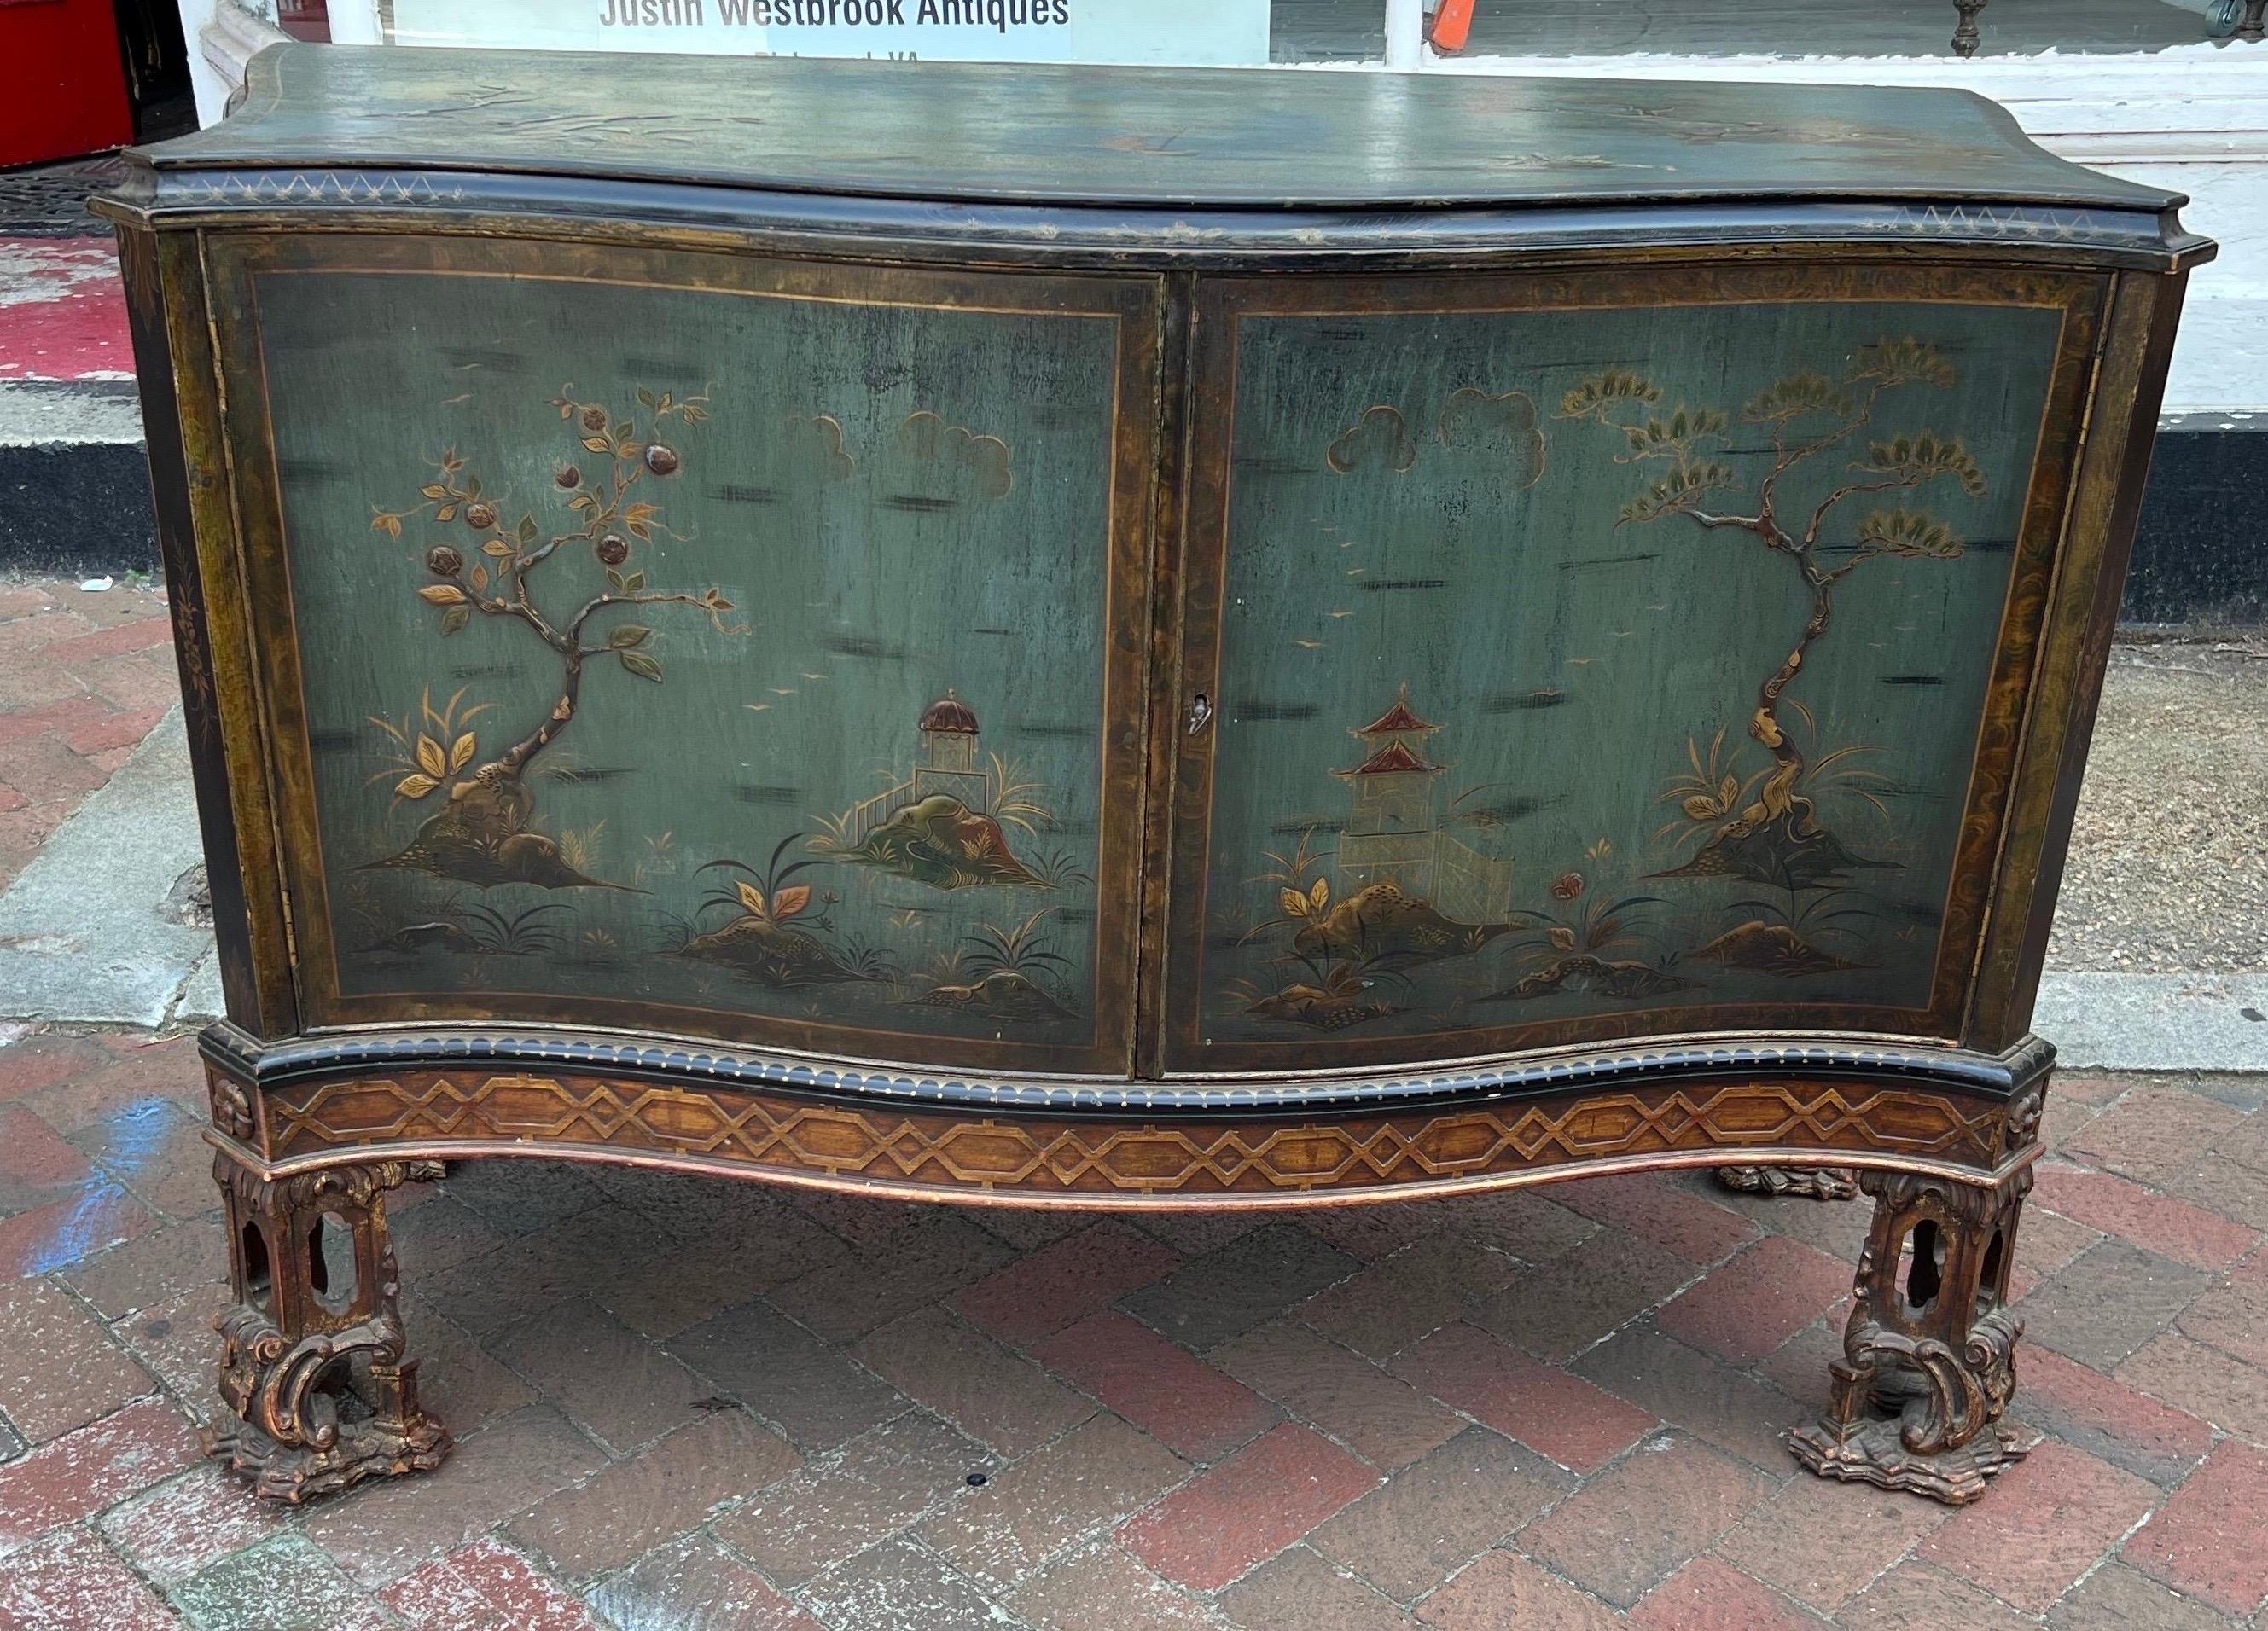 Gorgeous blue chinoiserie decorated cabinet on Chinese chippendale style feet. Great color and depth with very well done raised chinoiserie decoration.

Great as a cabinet or would make an incredible bathroom vanity.